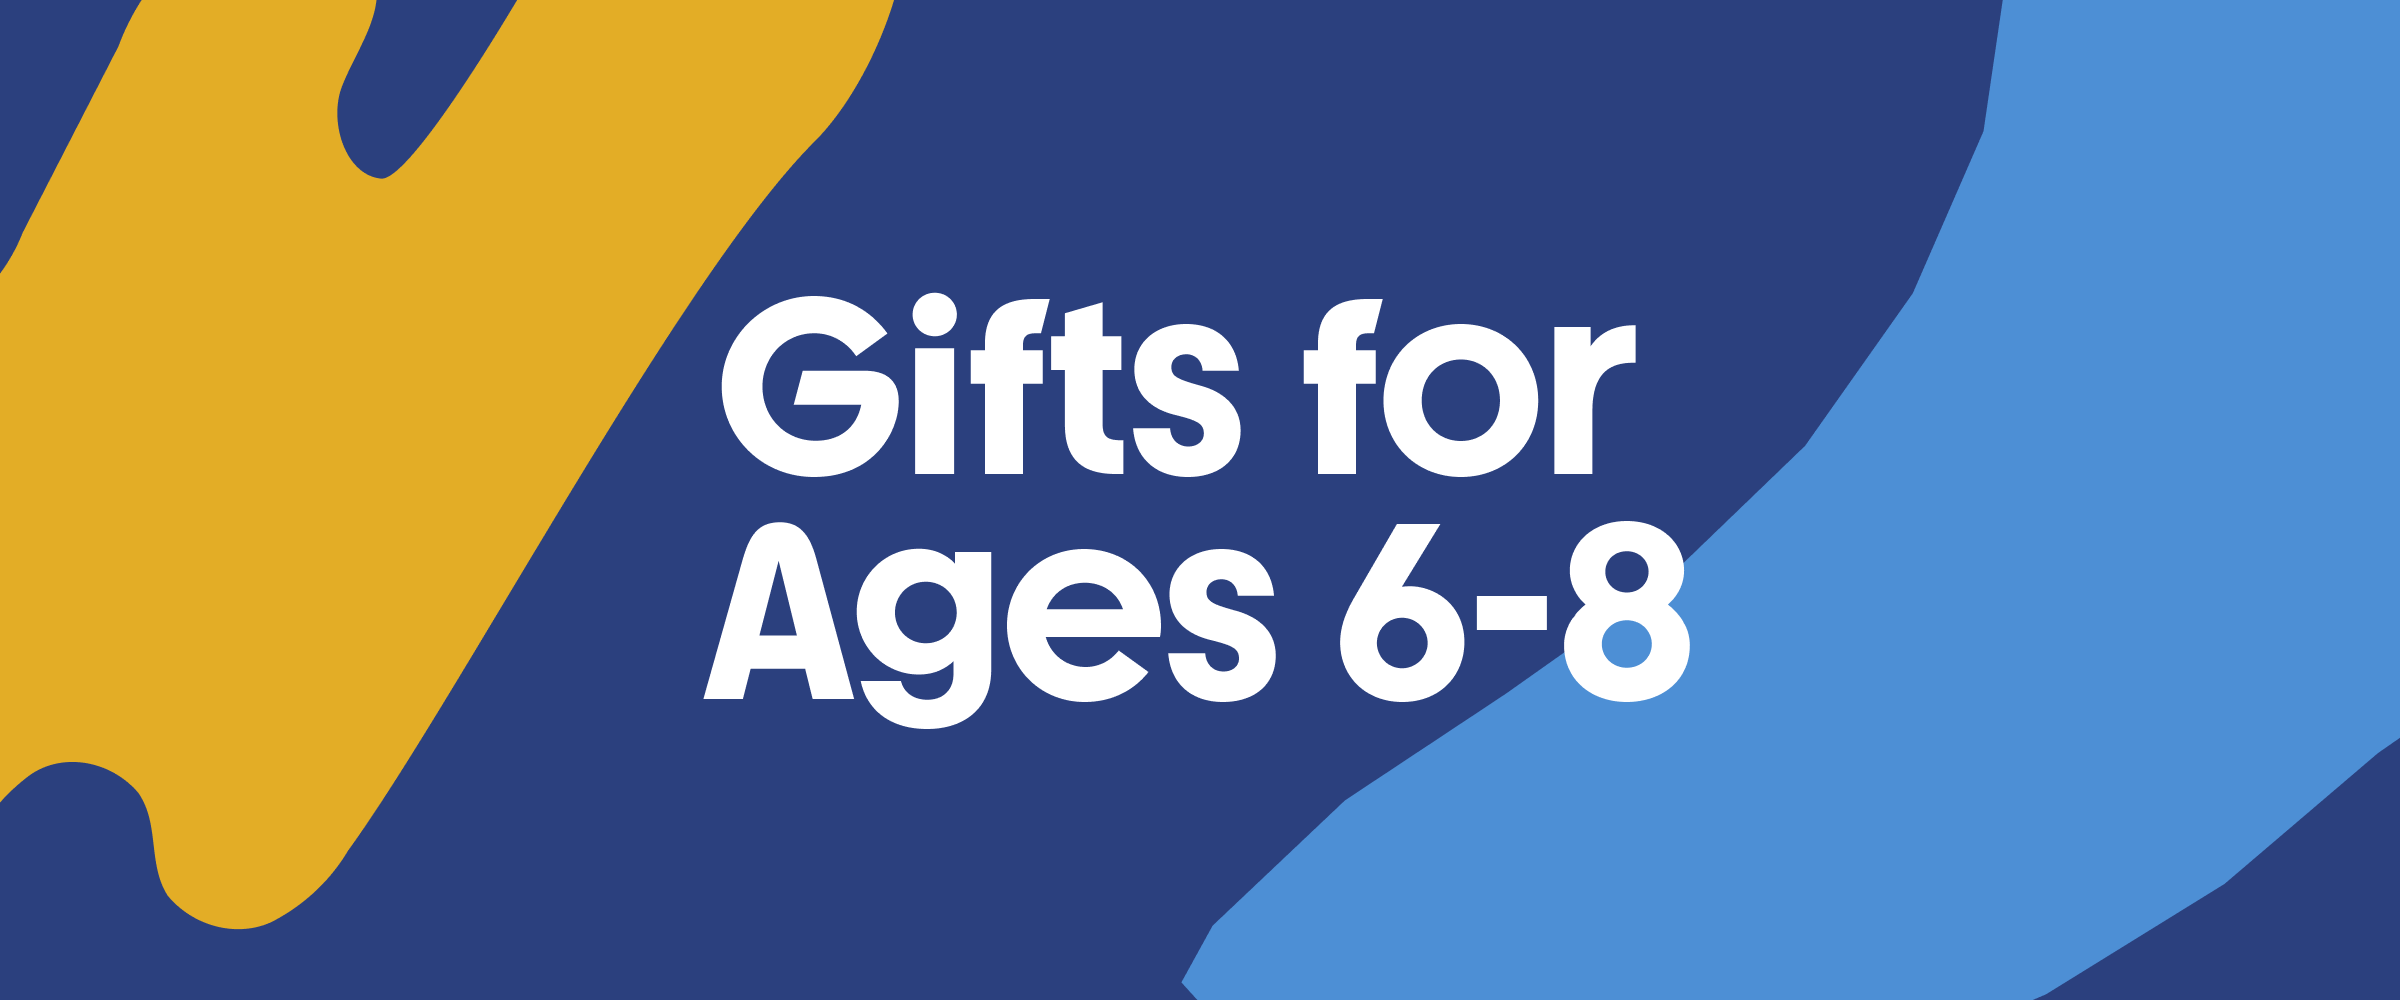 Gifts for Ages 6-8